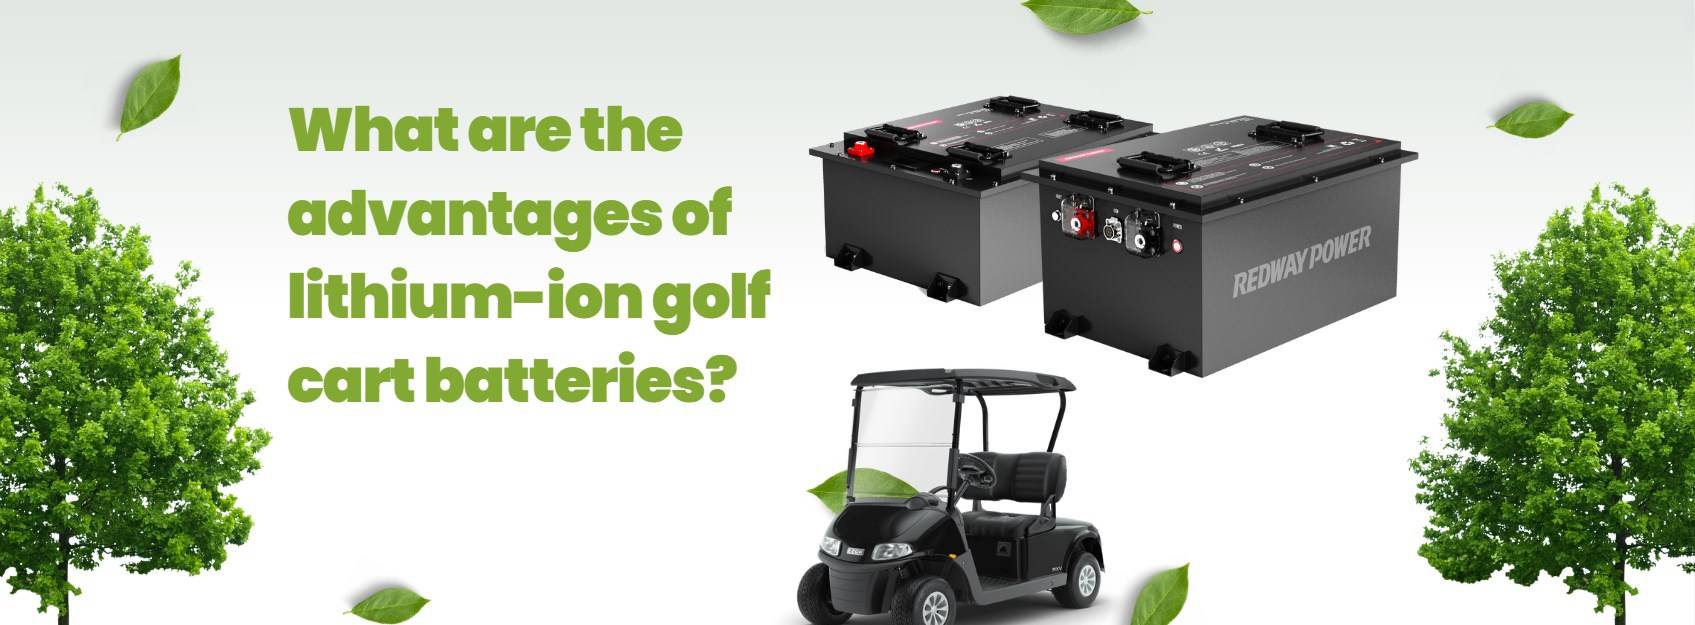 What are the advantages of lithium-ion golf cart batteries? 48v 100ah lifepo4 golf cart battery redway